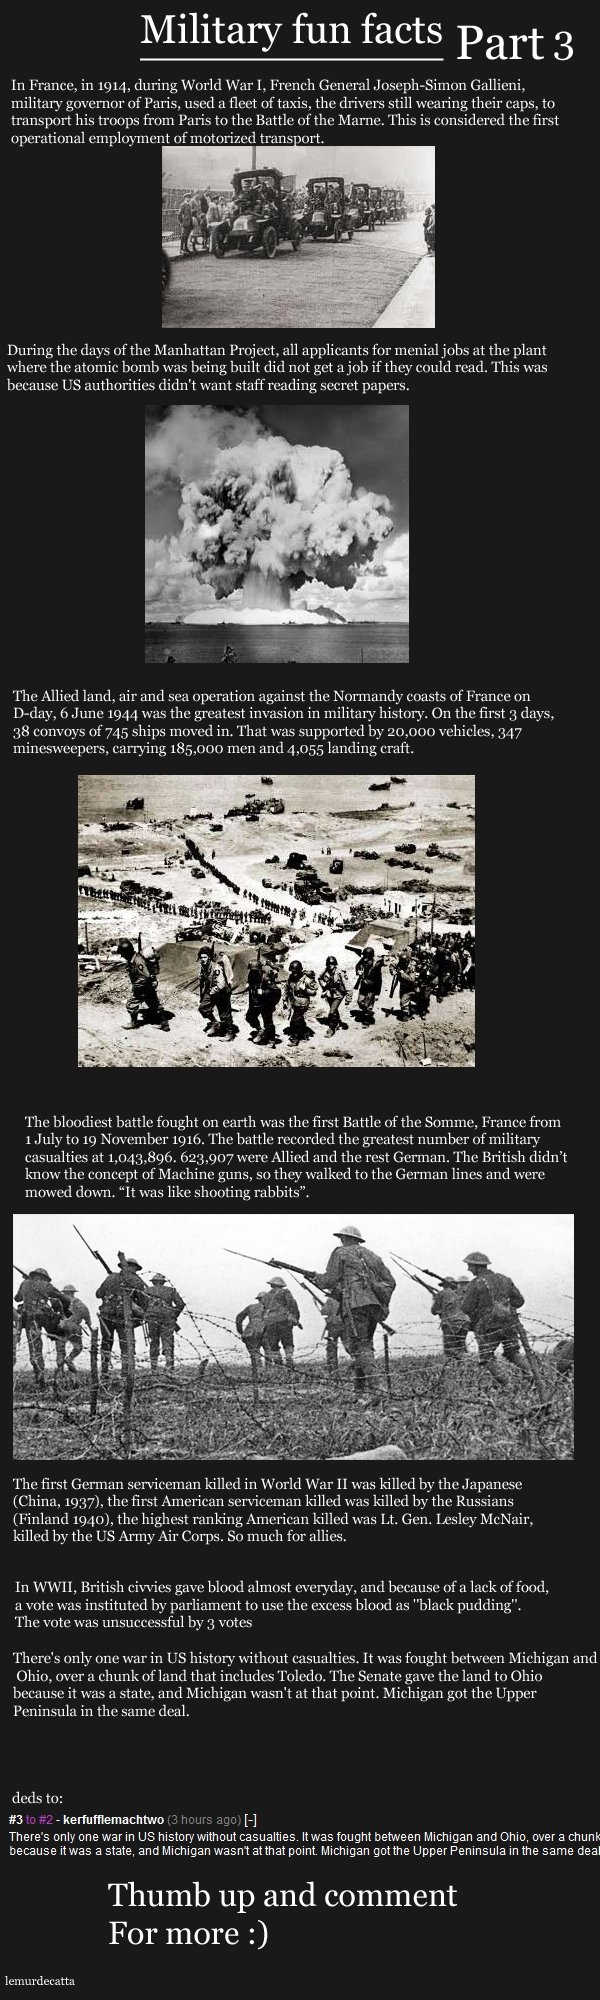 military-fun-facts-part-3